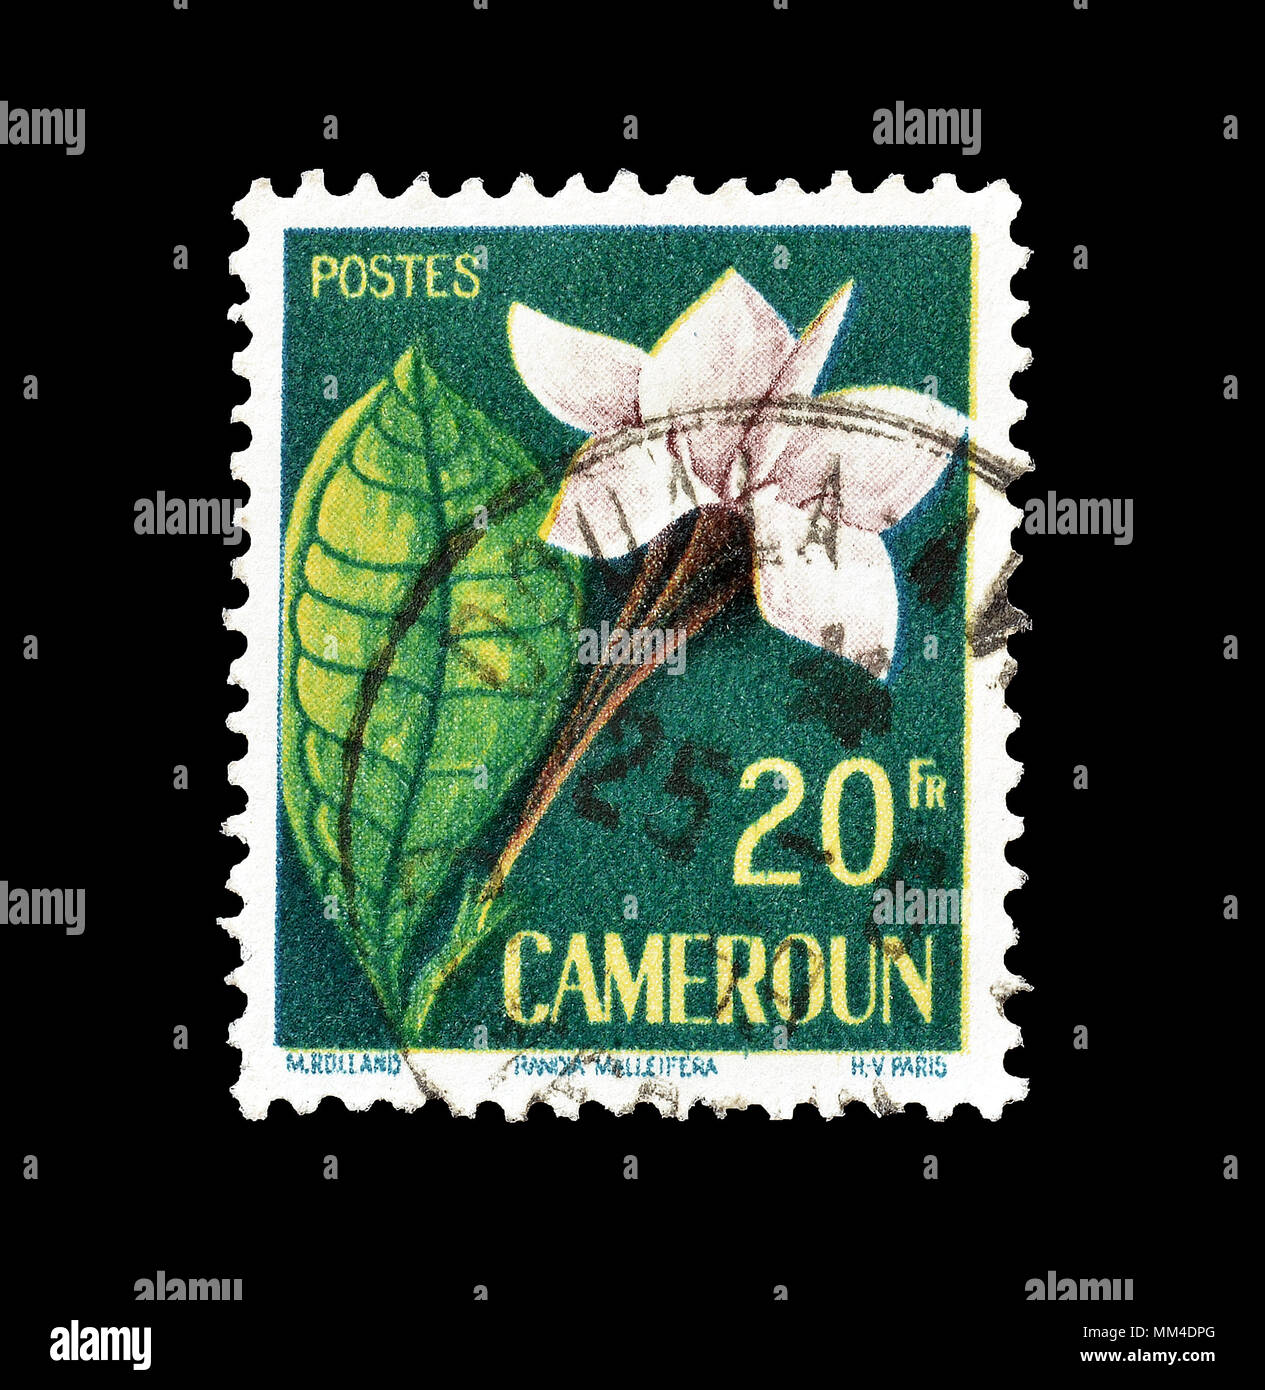 Cancelled postage stamp printed by Cameroon, that shows Randia malleifera, circa 1959. Stock Photo